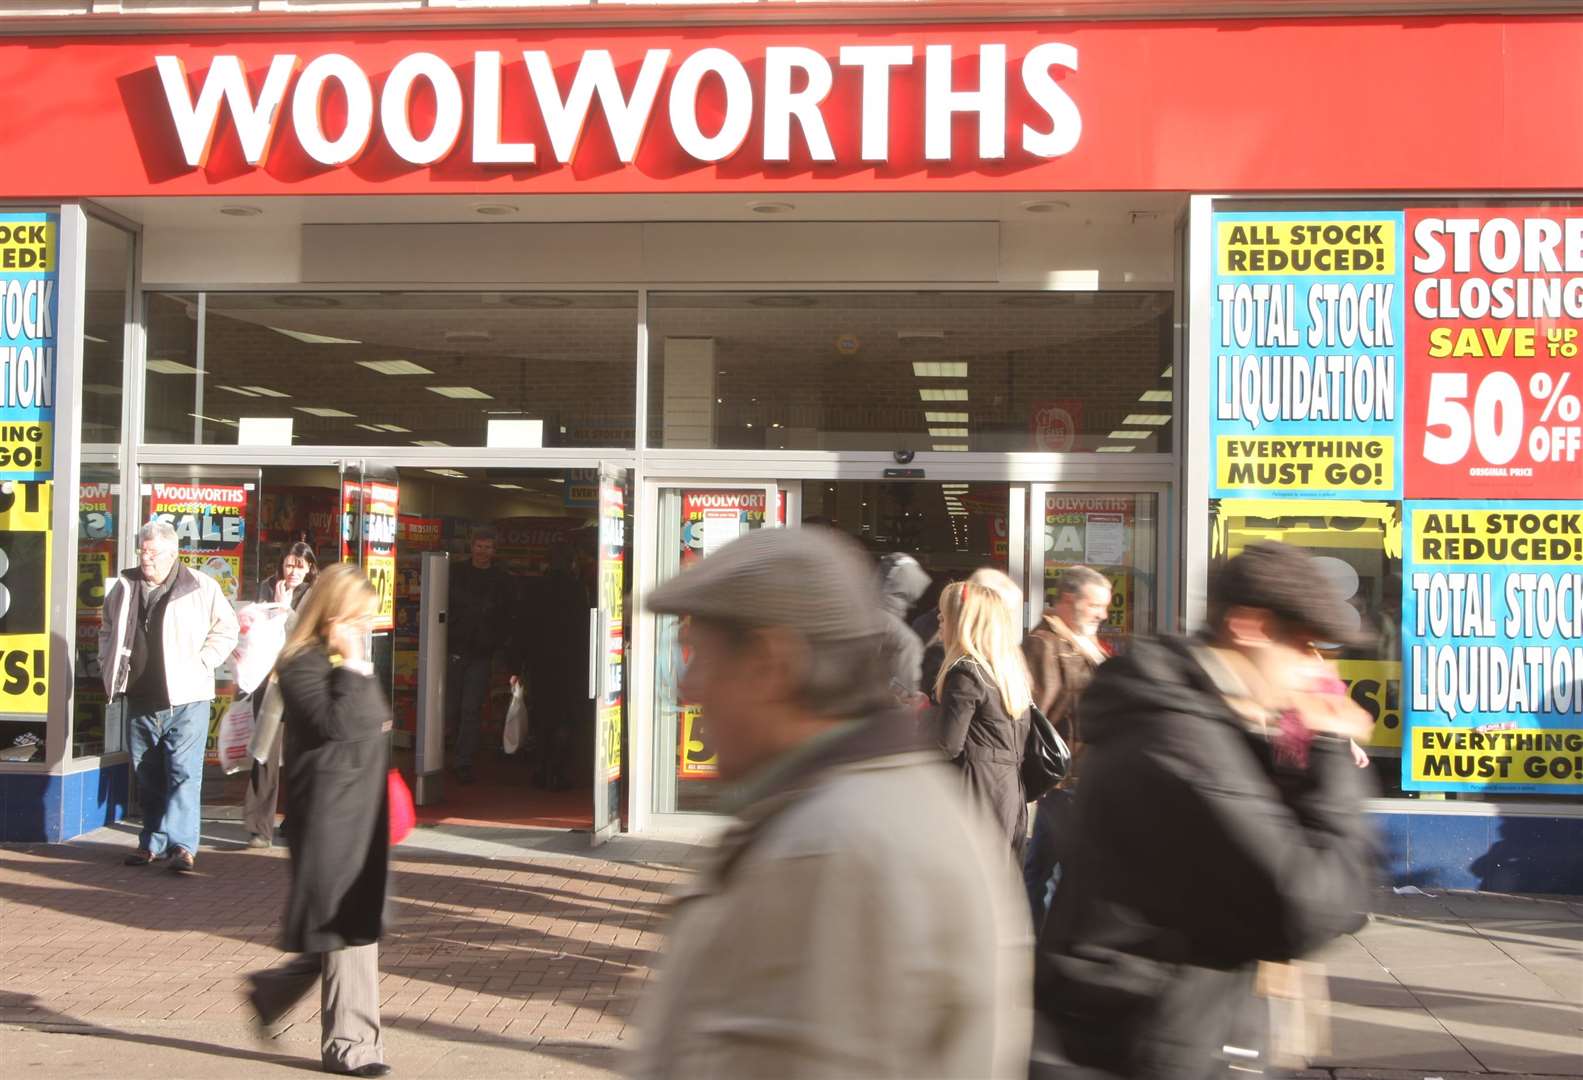 Woolworths collapsed due to us turning our back on it – however much we may pine for it today. Picture: John Westhrop